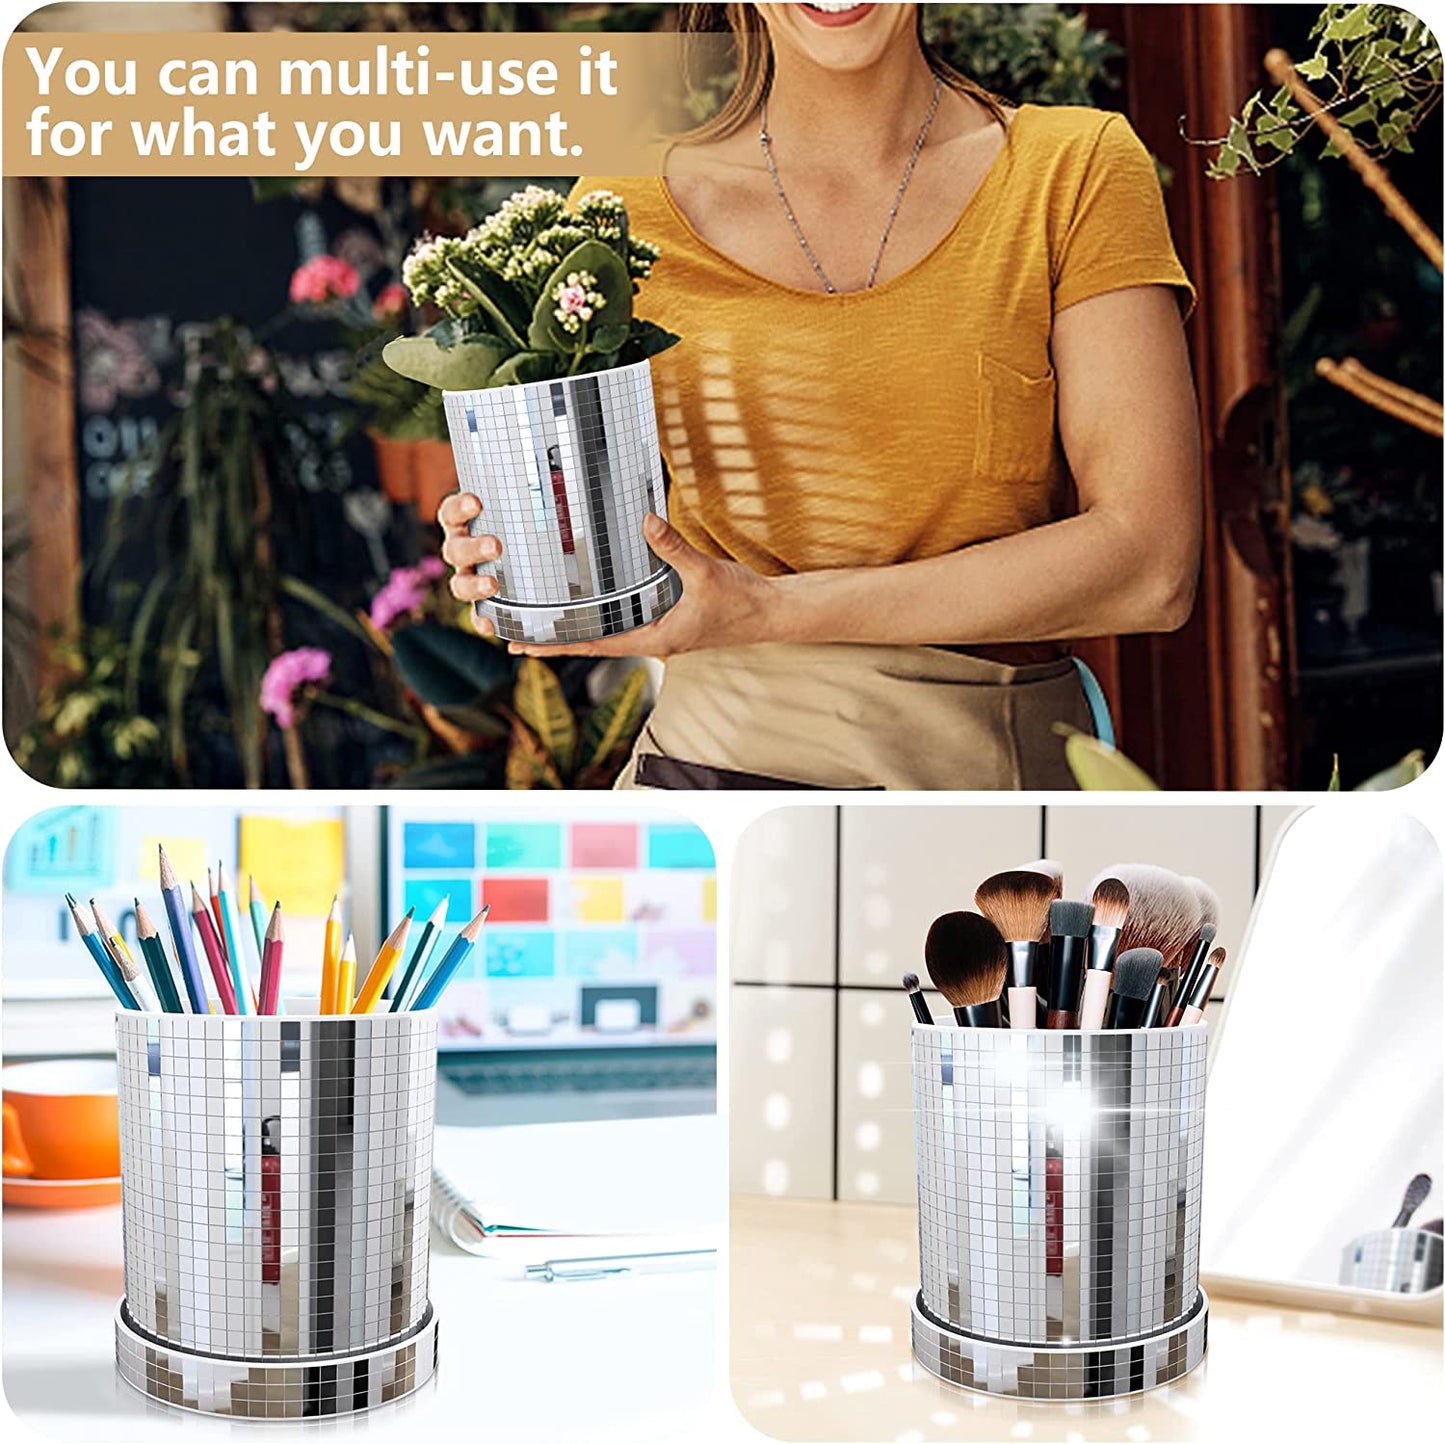 Disco Cylindrical Planter Pot,4.5*4.8 Inch Mirror Disco Cylindrical Vase, Modern Disco Plastic Planter Pot with Drainage Hole and Saucers for Indoor Outdoor Plants (Silver)